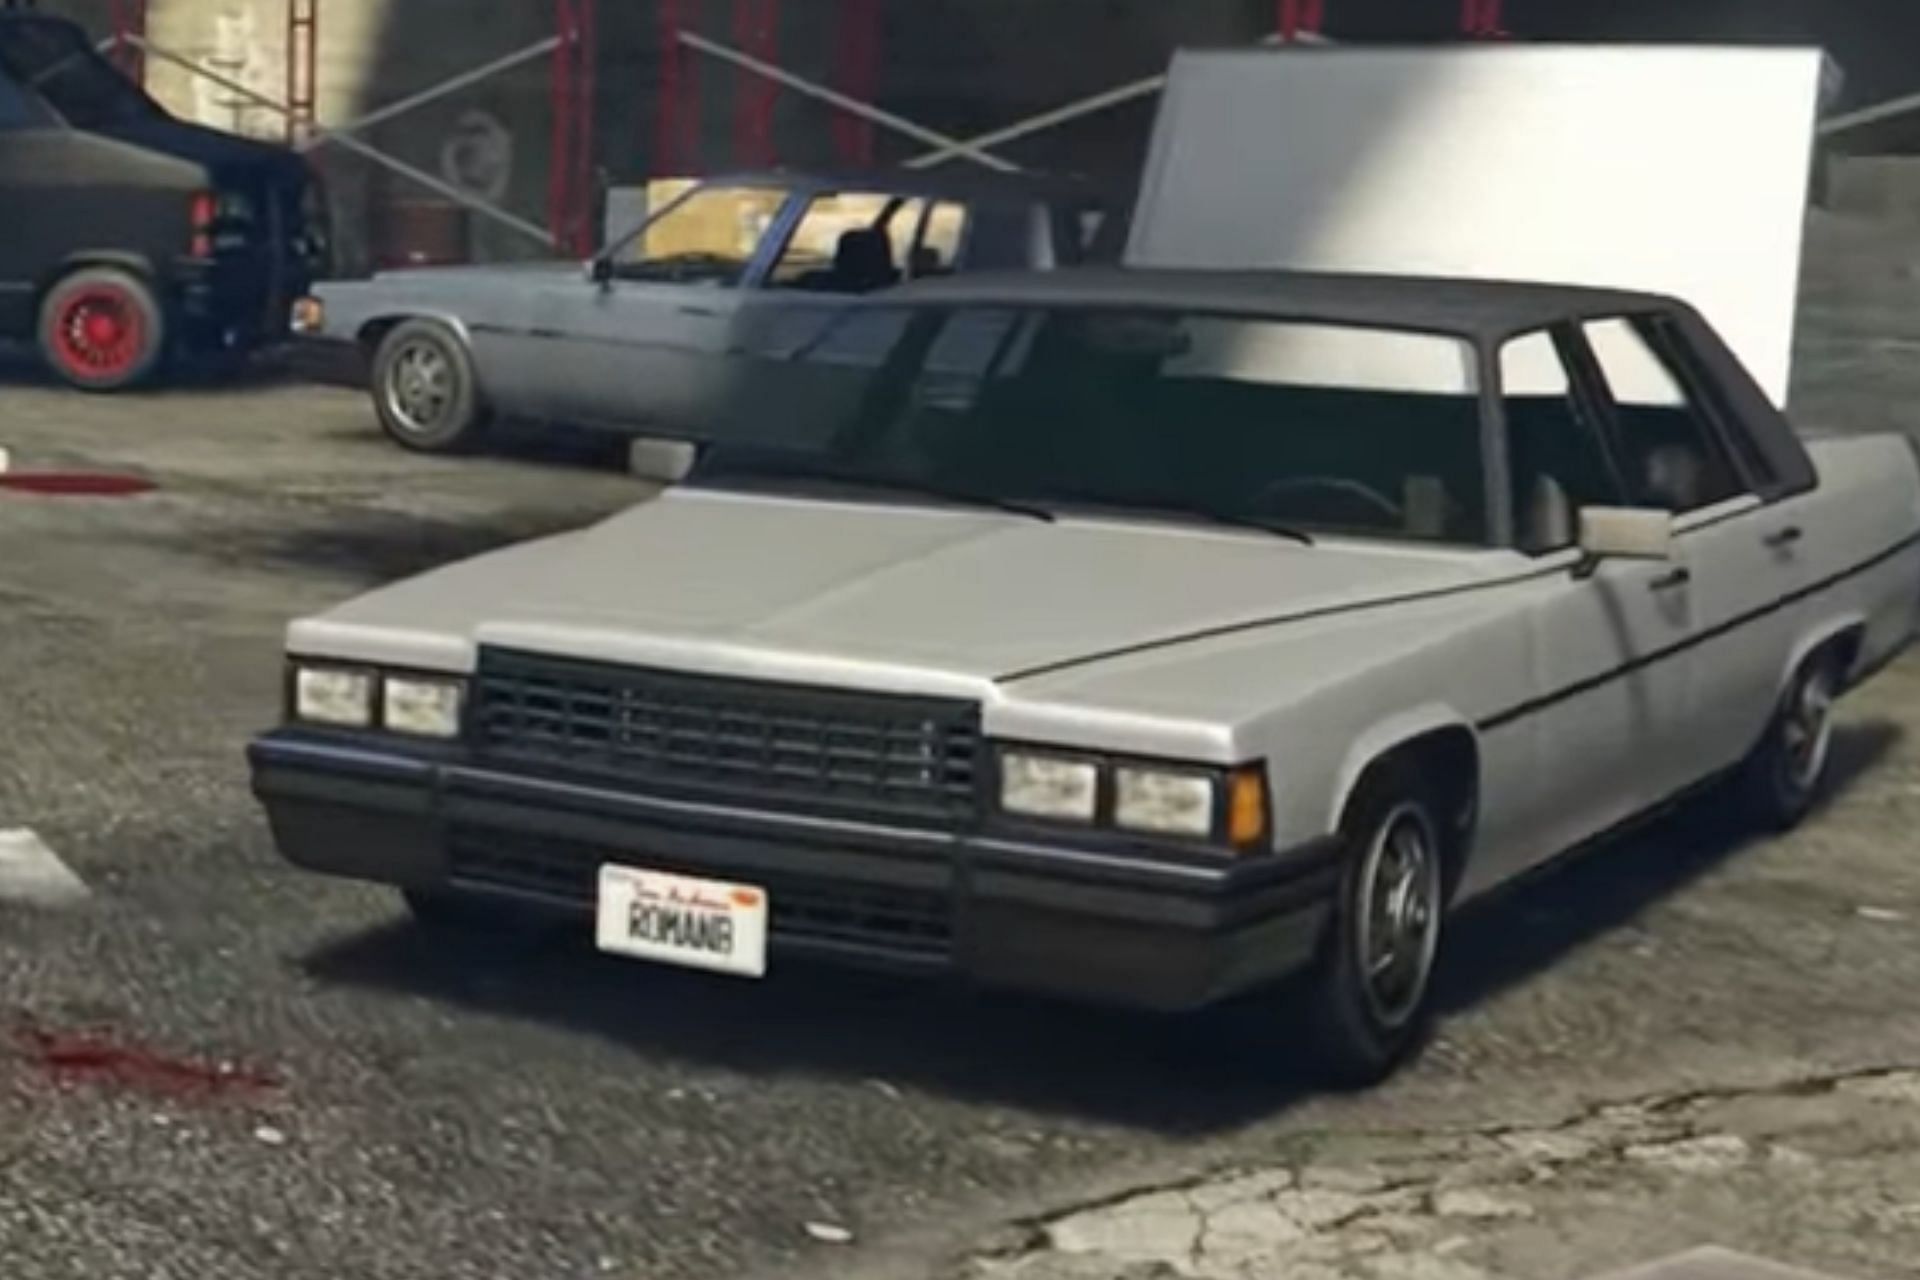 5 Niko Bellic references hidden in GTA 5 that players might have missed